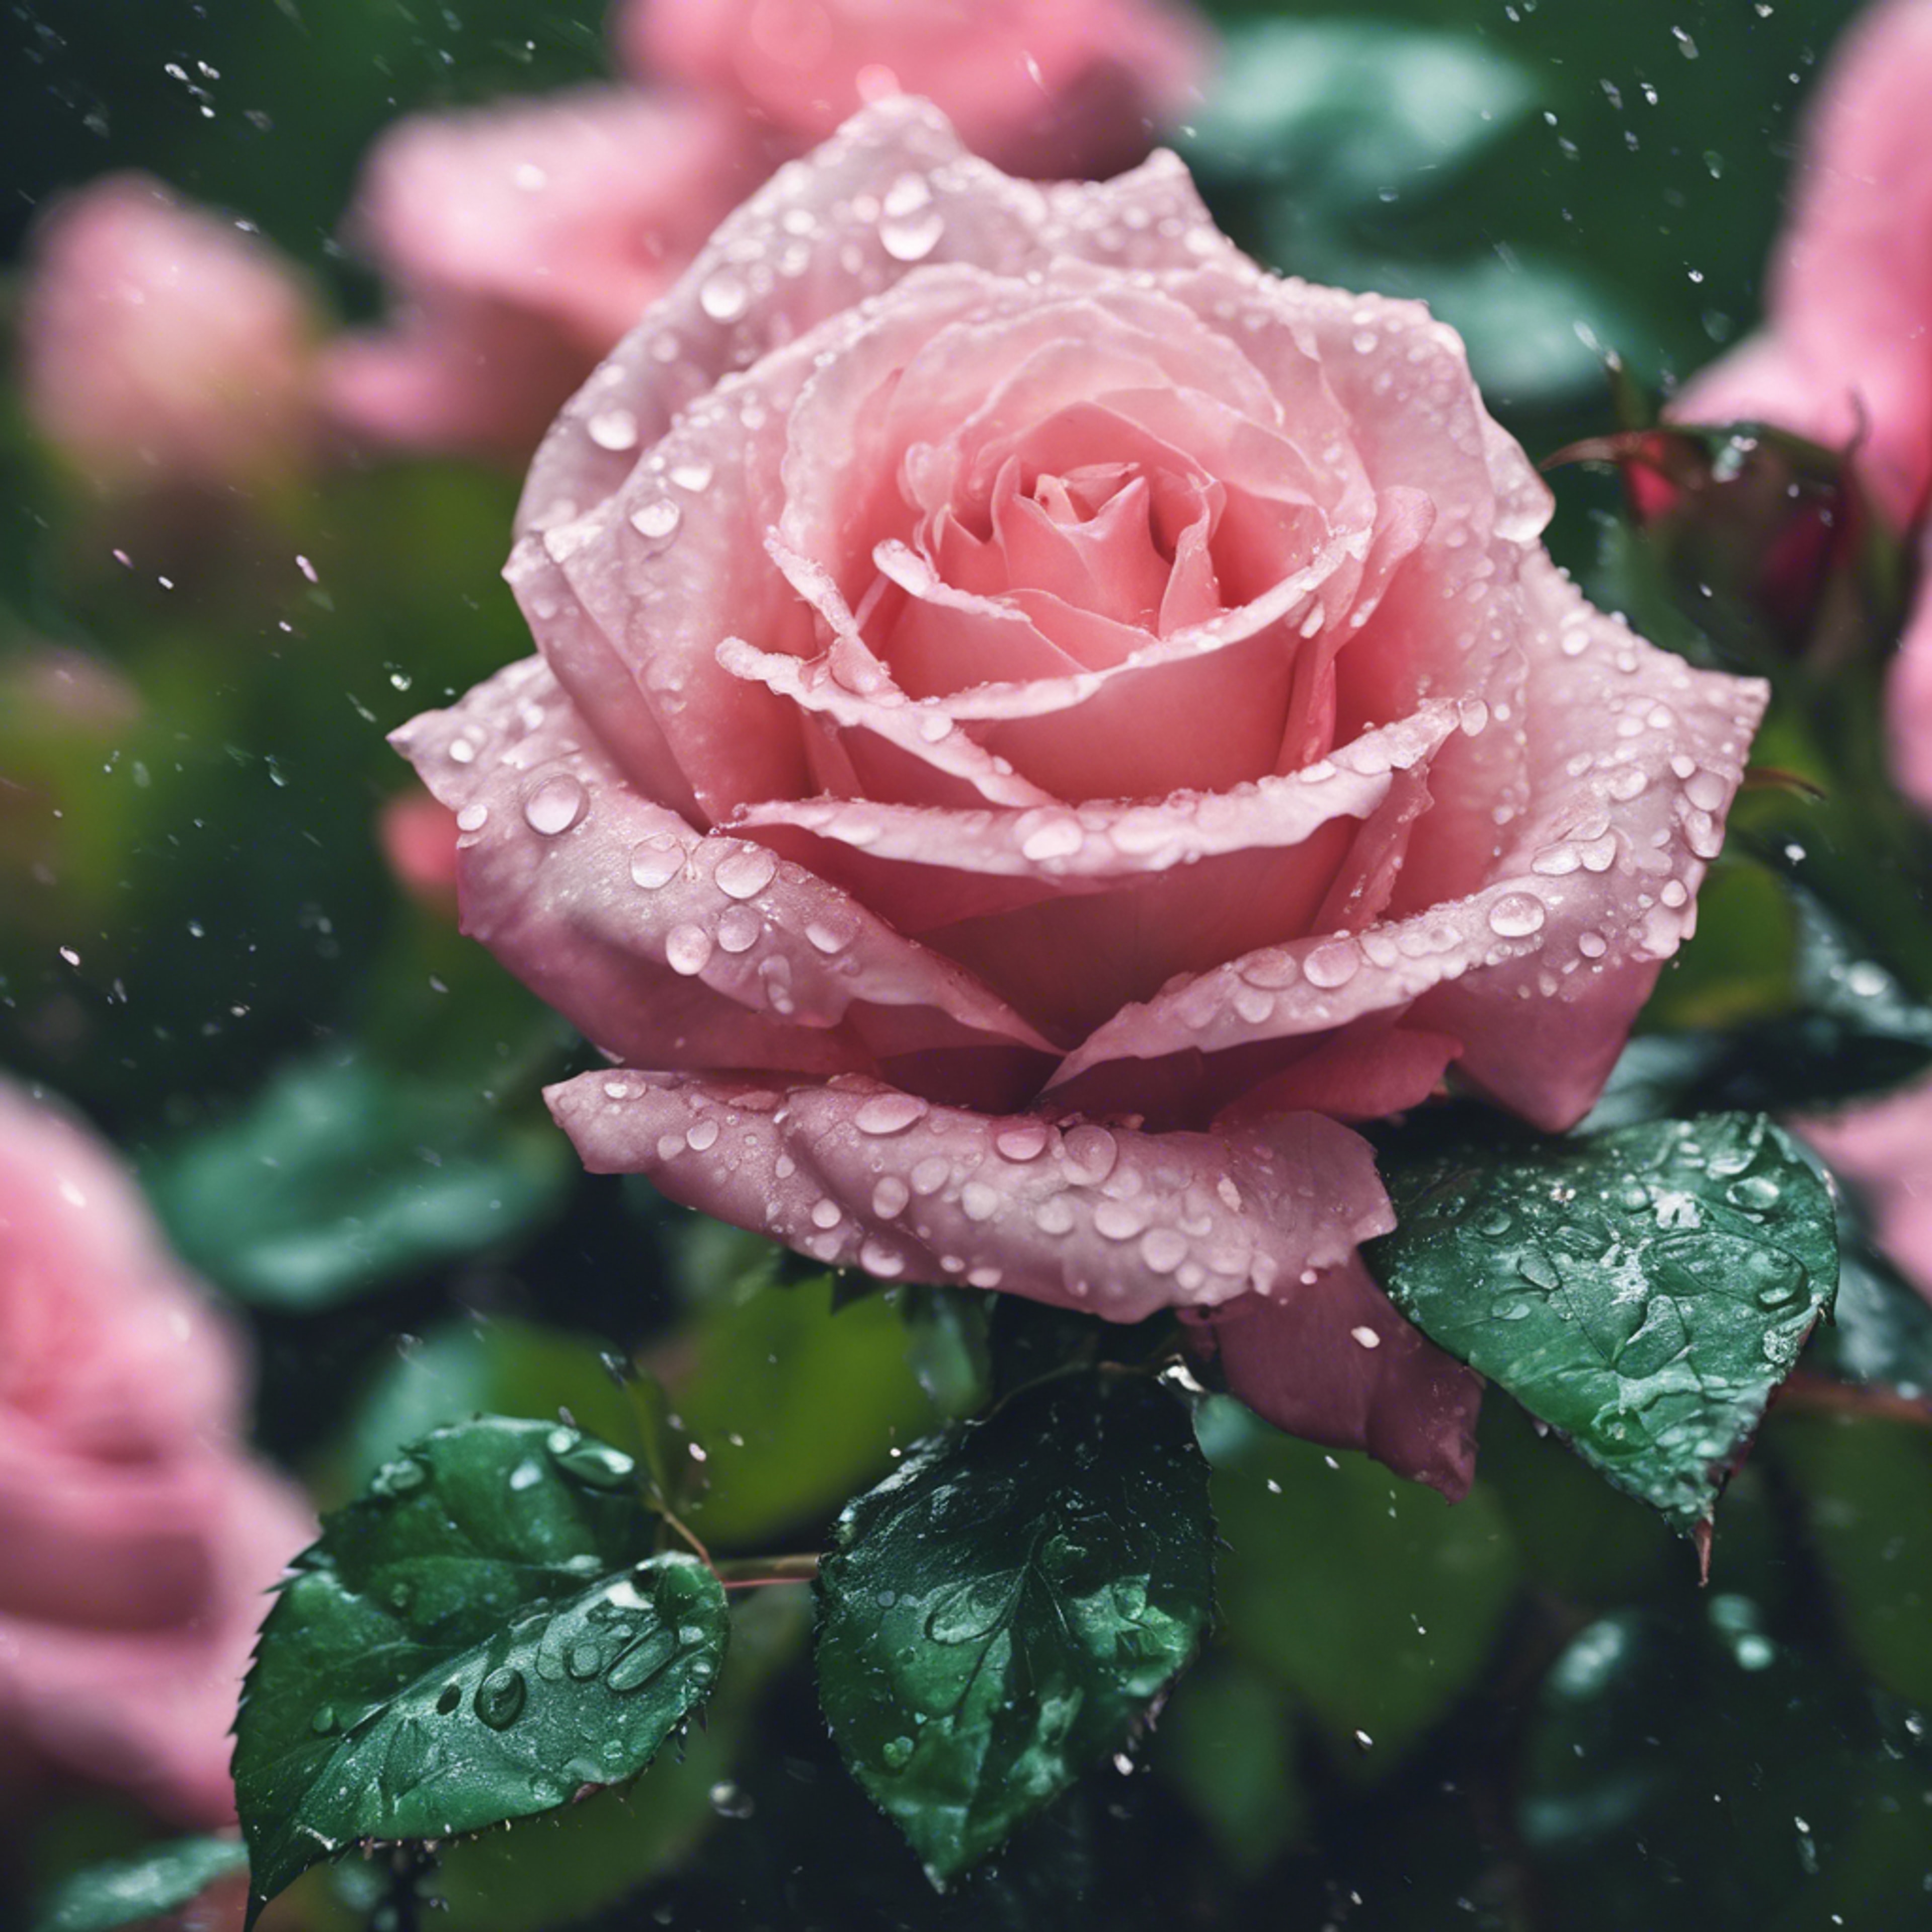 Gentle rain falling on the bright green leaves and pink roses. Валлпапер[2479f95970de45b492b9]